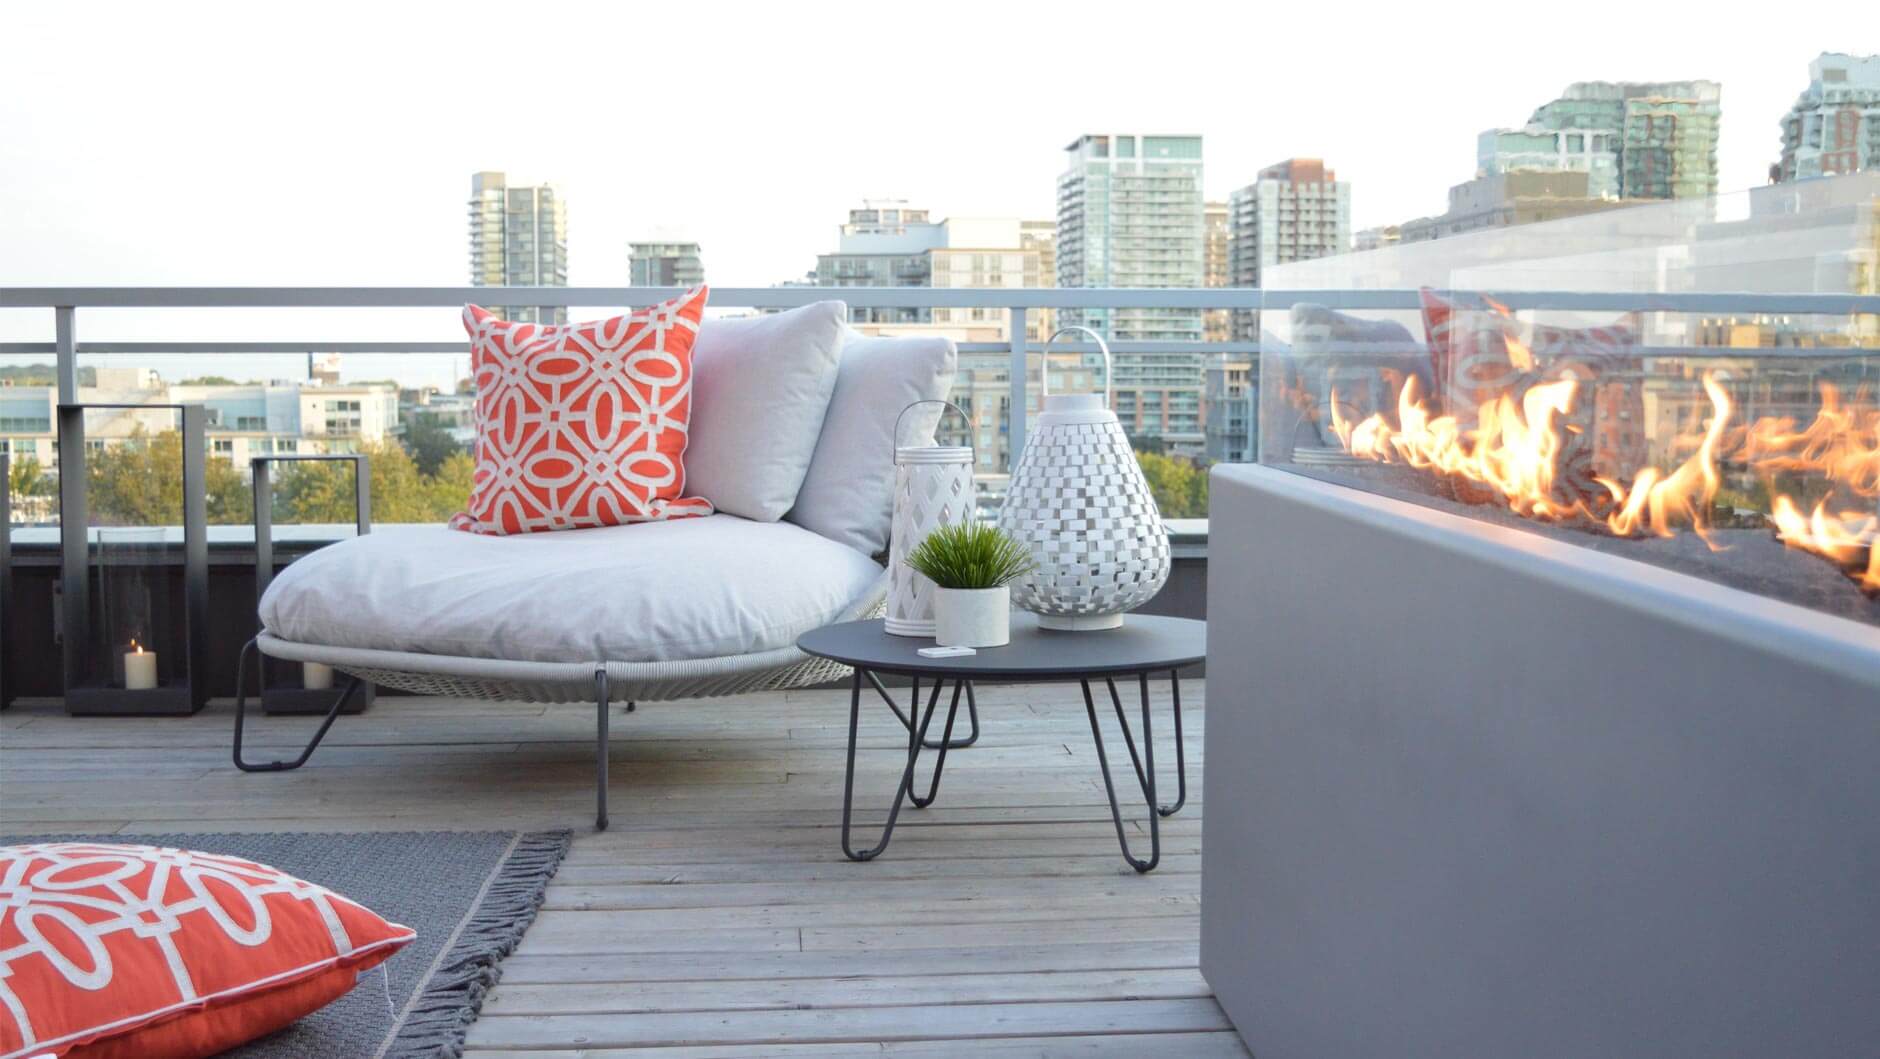 Balcony patio with fire to the right and a chair with mini table in front